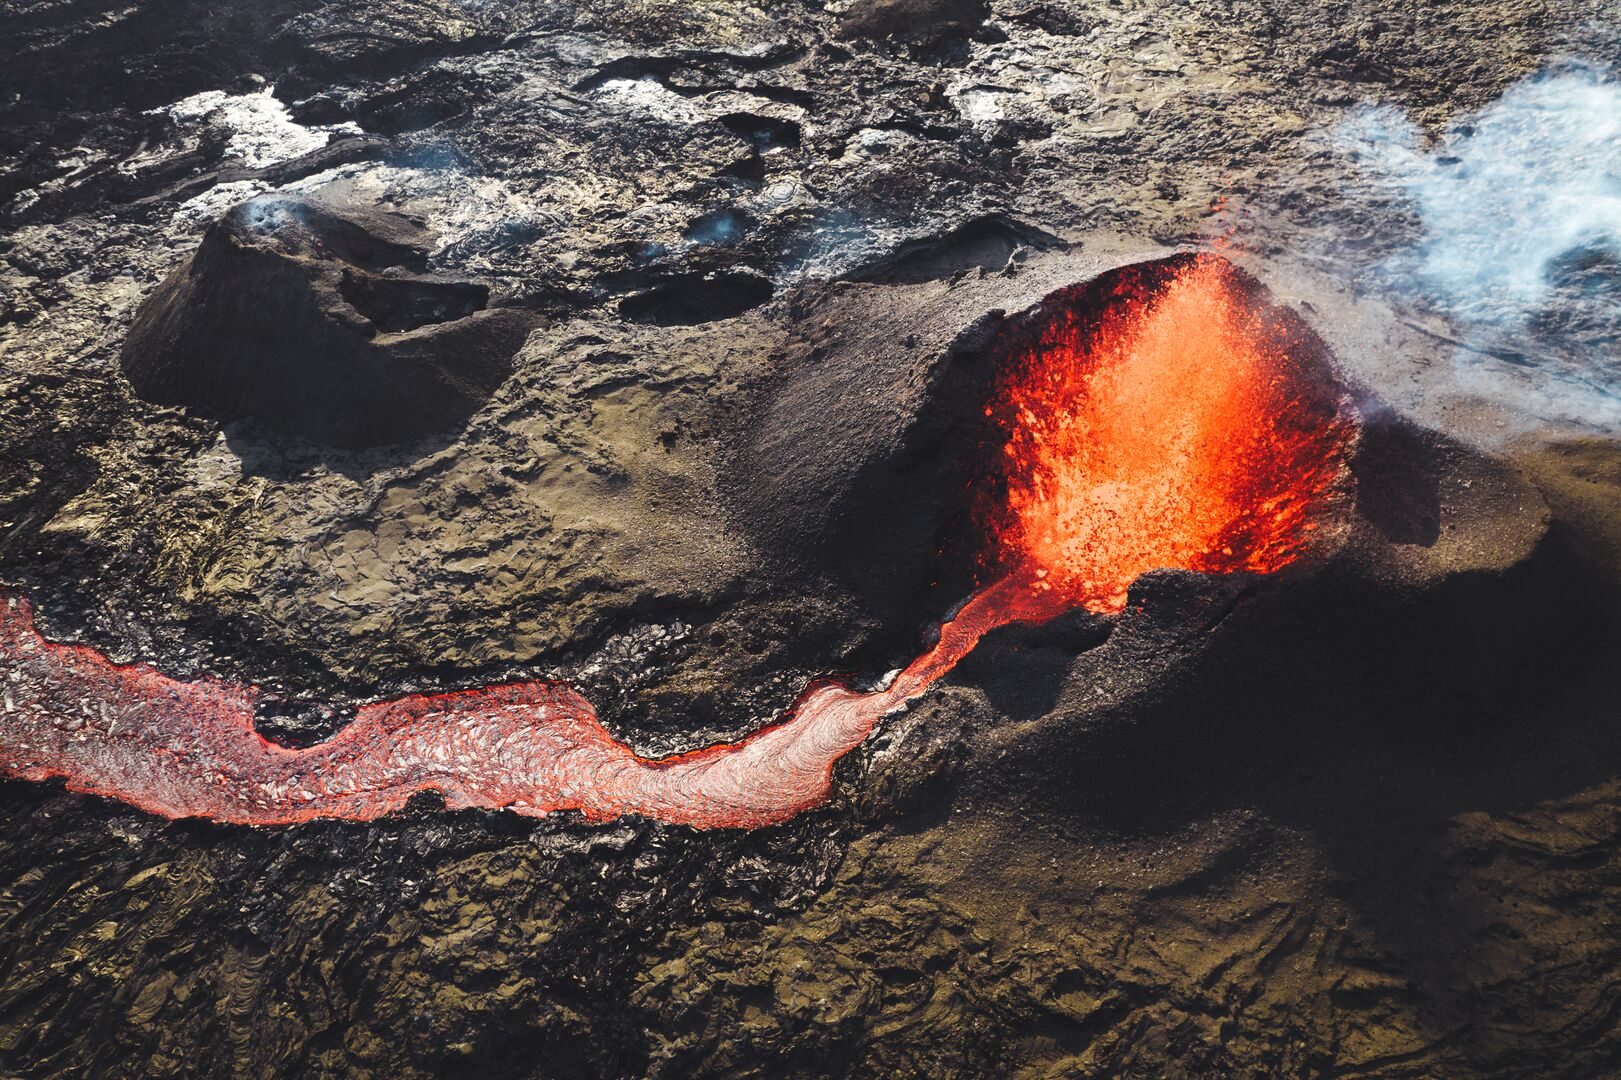 A close up image of the erupting volcano in Iceland with lava spurting up and pouring out the side